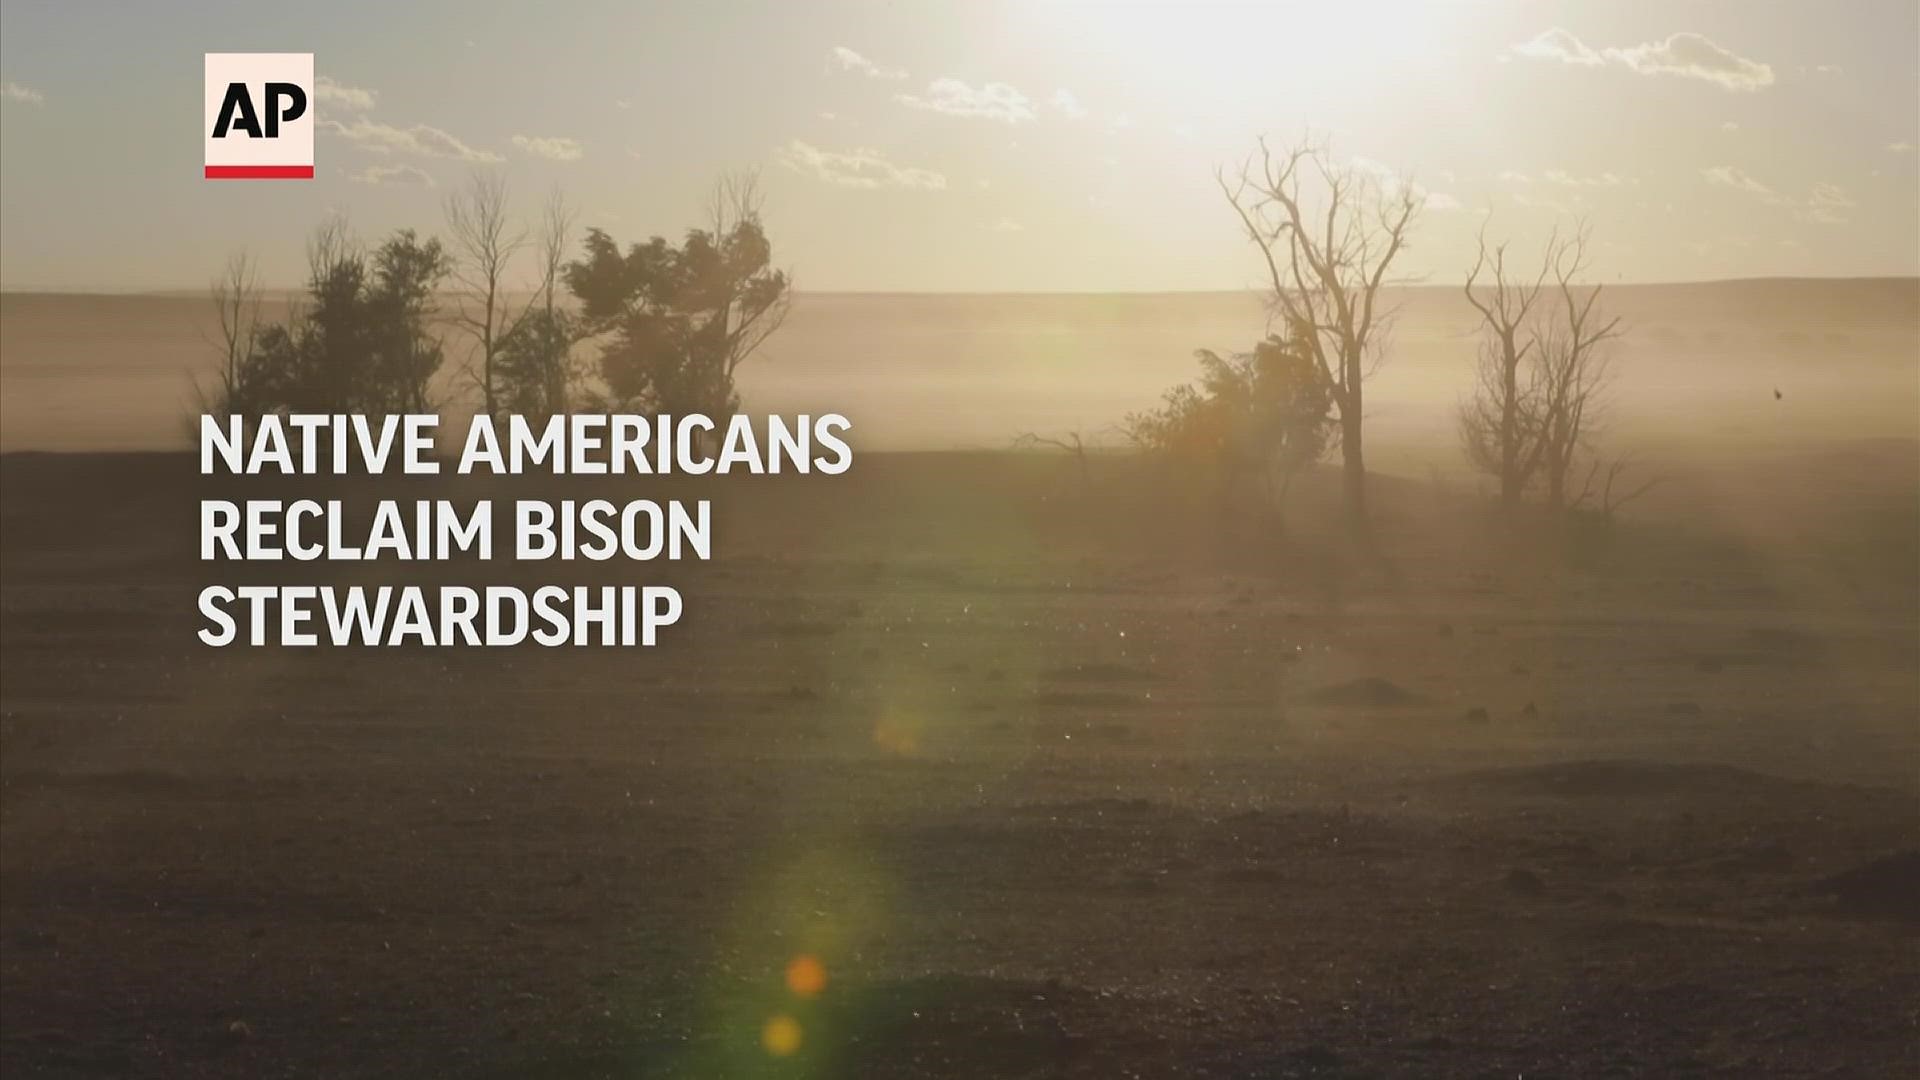 From South Dakota and Oklahoma to Alaska and Alberta, Indigenous groups in the U.S. and Canada are leading efforts to restore bison across North America.